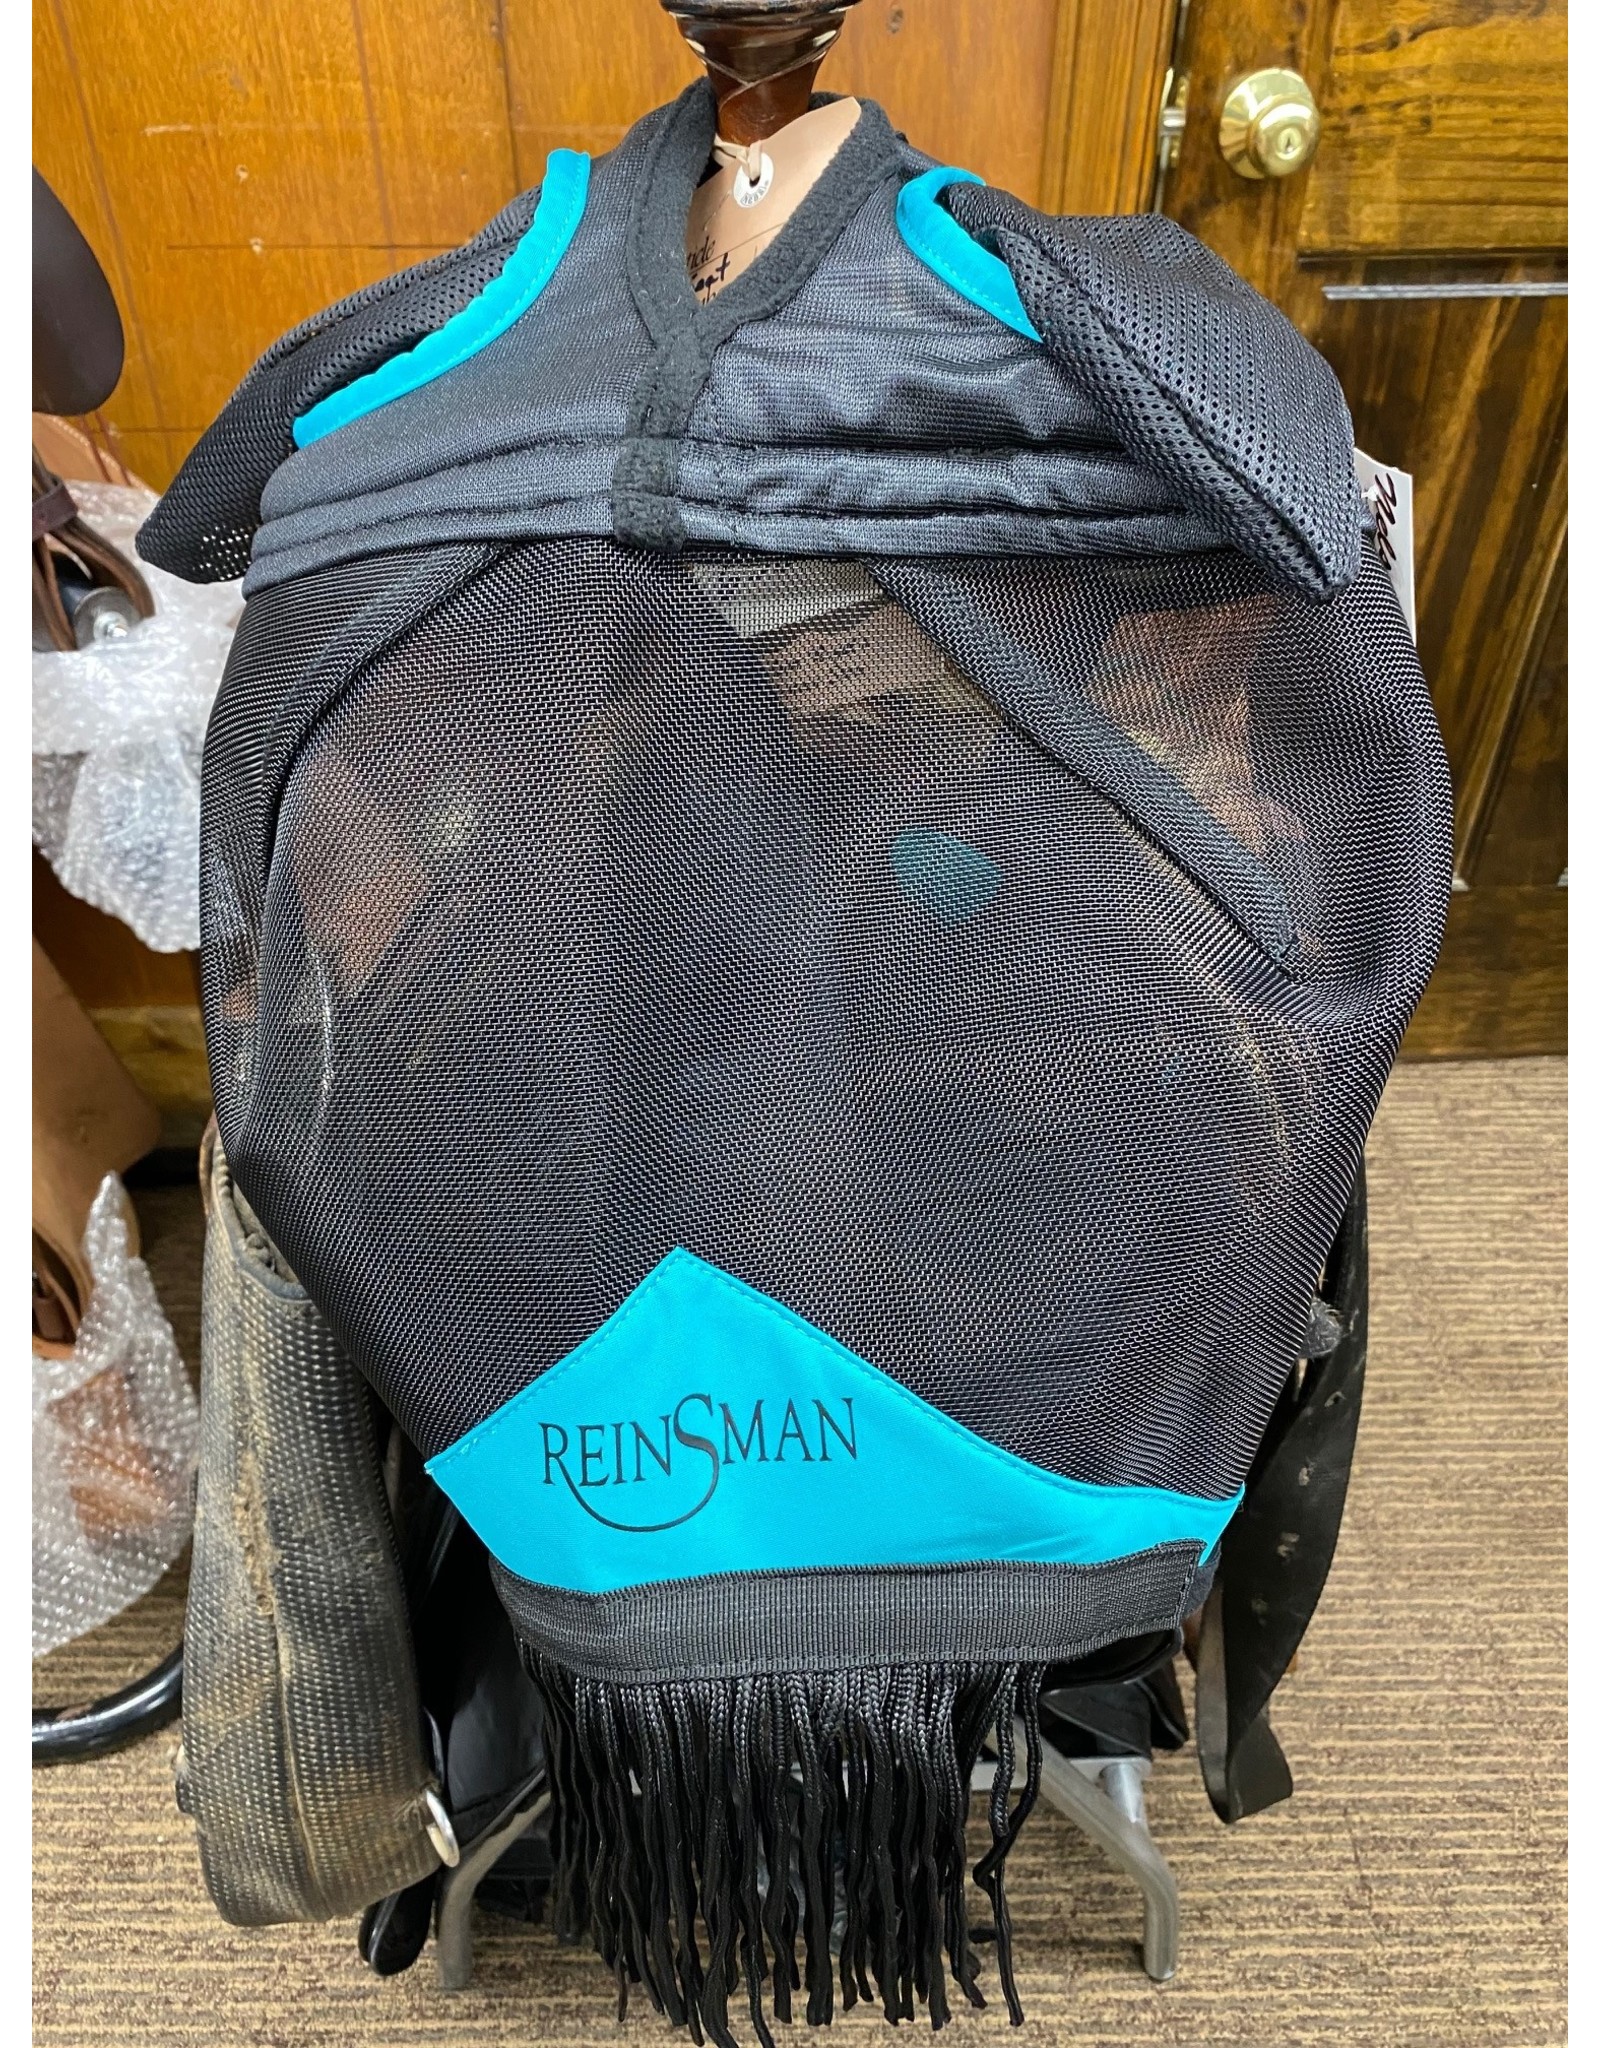 Reinsman Guardian Fly Mask With Ears and Nose F103 Light Blue